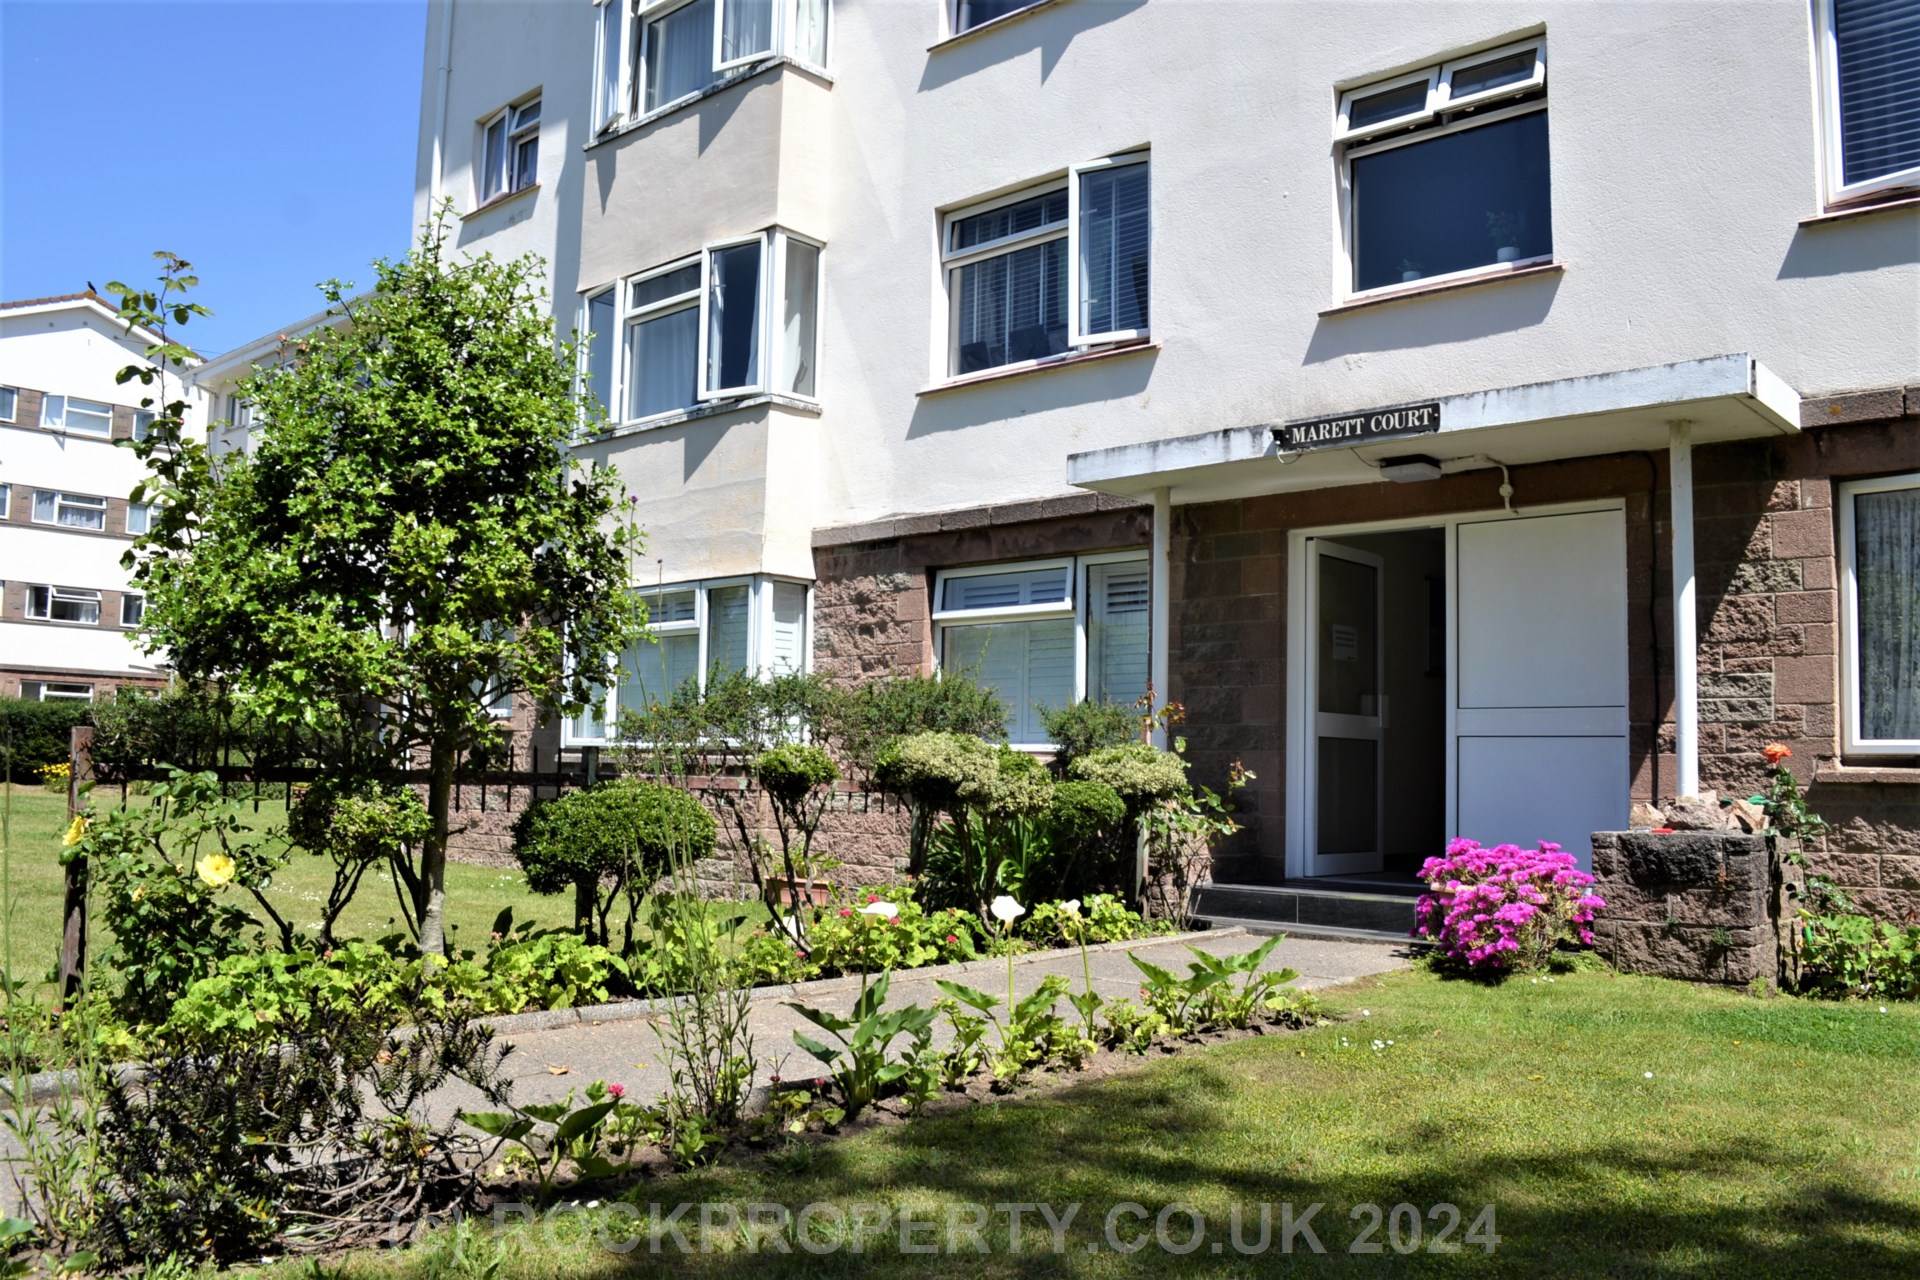 IMMACULATE 1 BED FLAT, Havre Des Pas, St Helier, Image 2